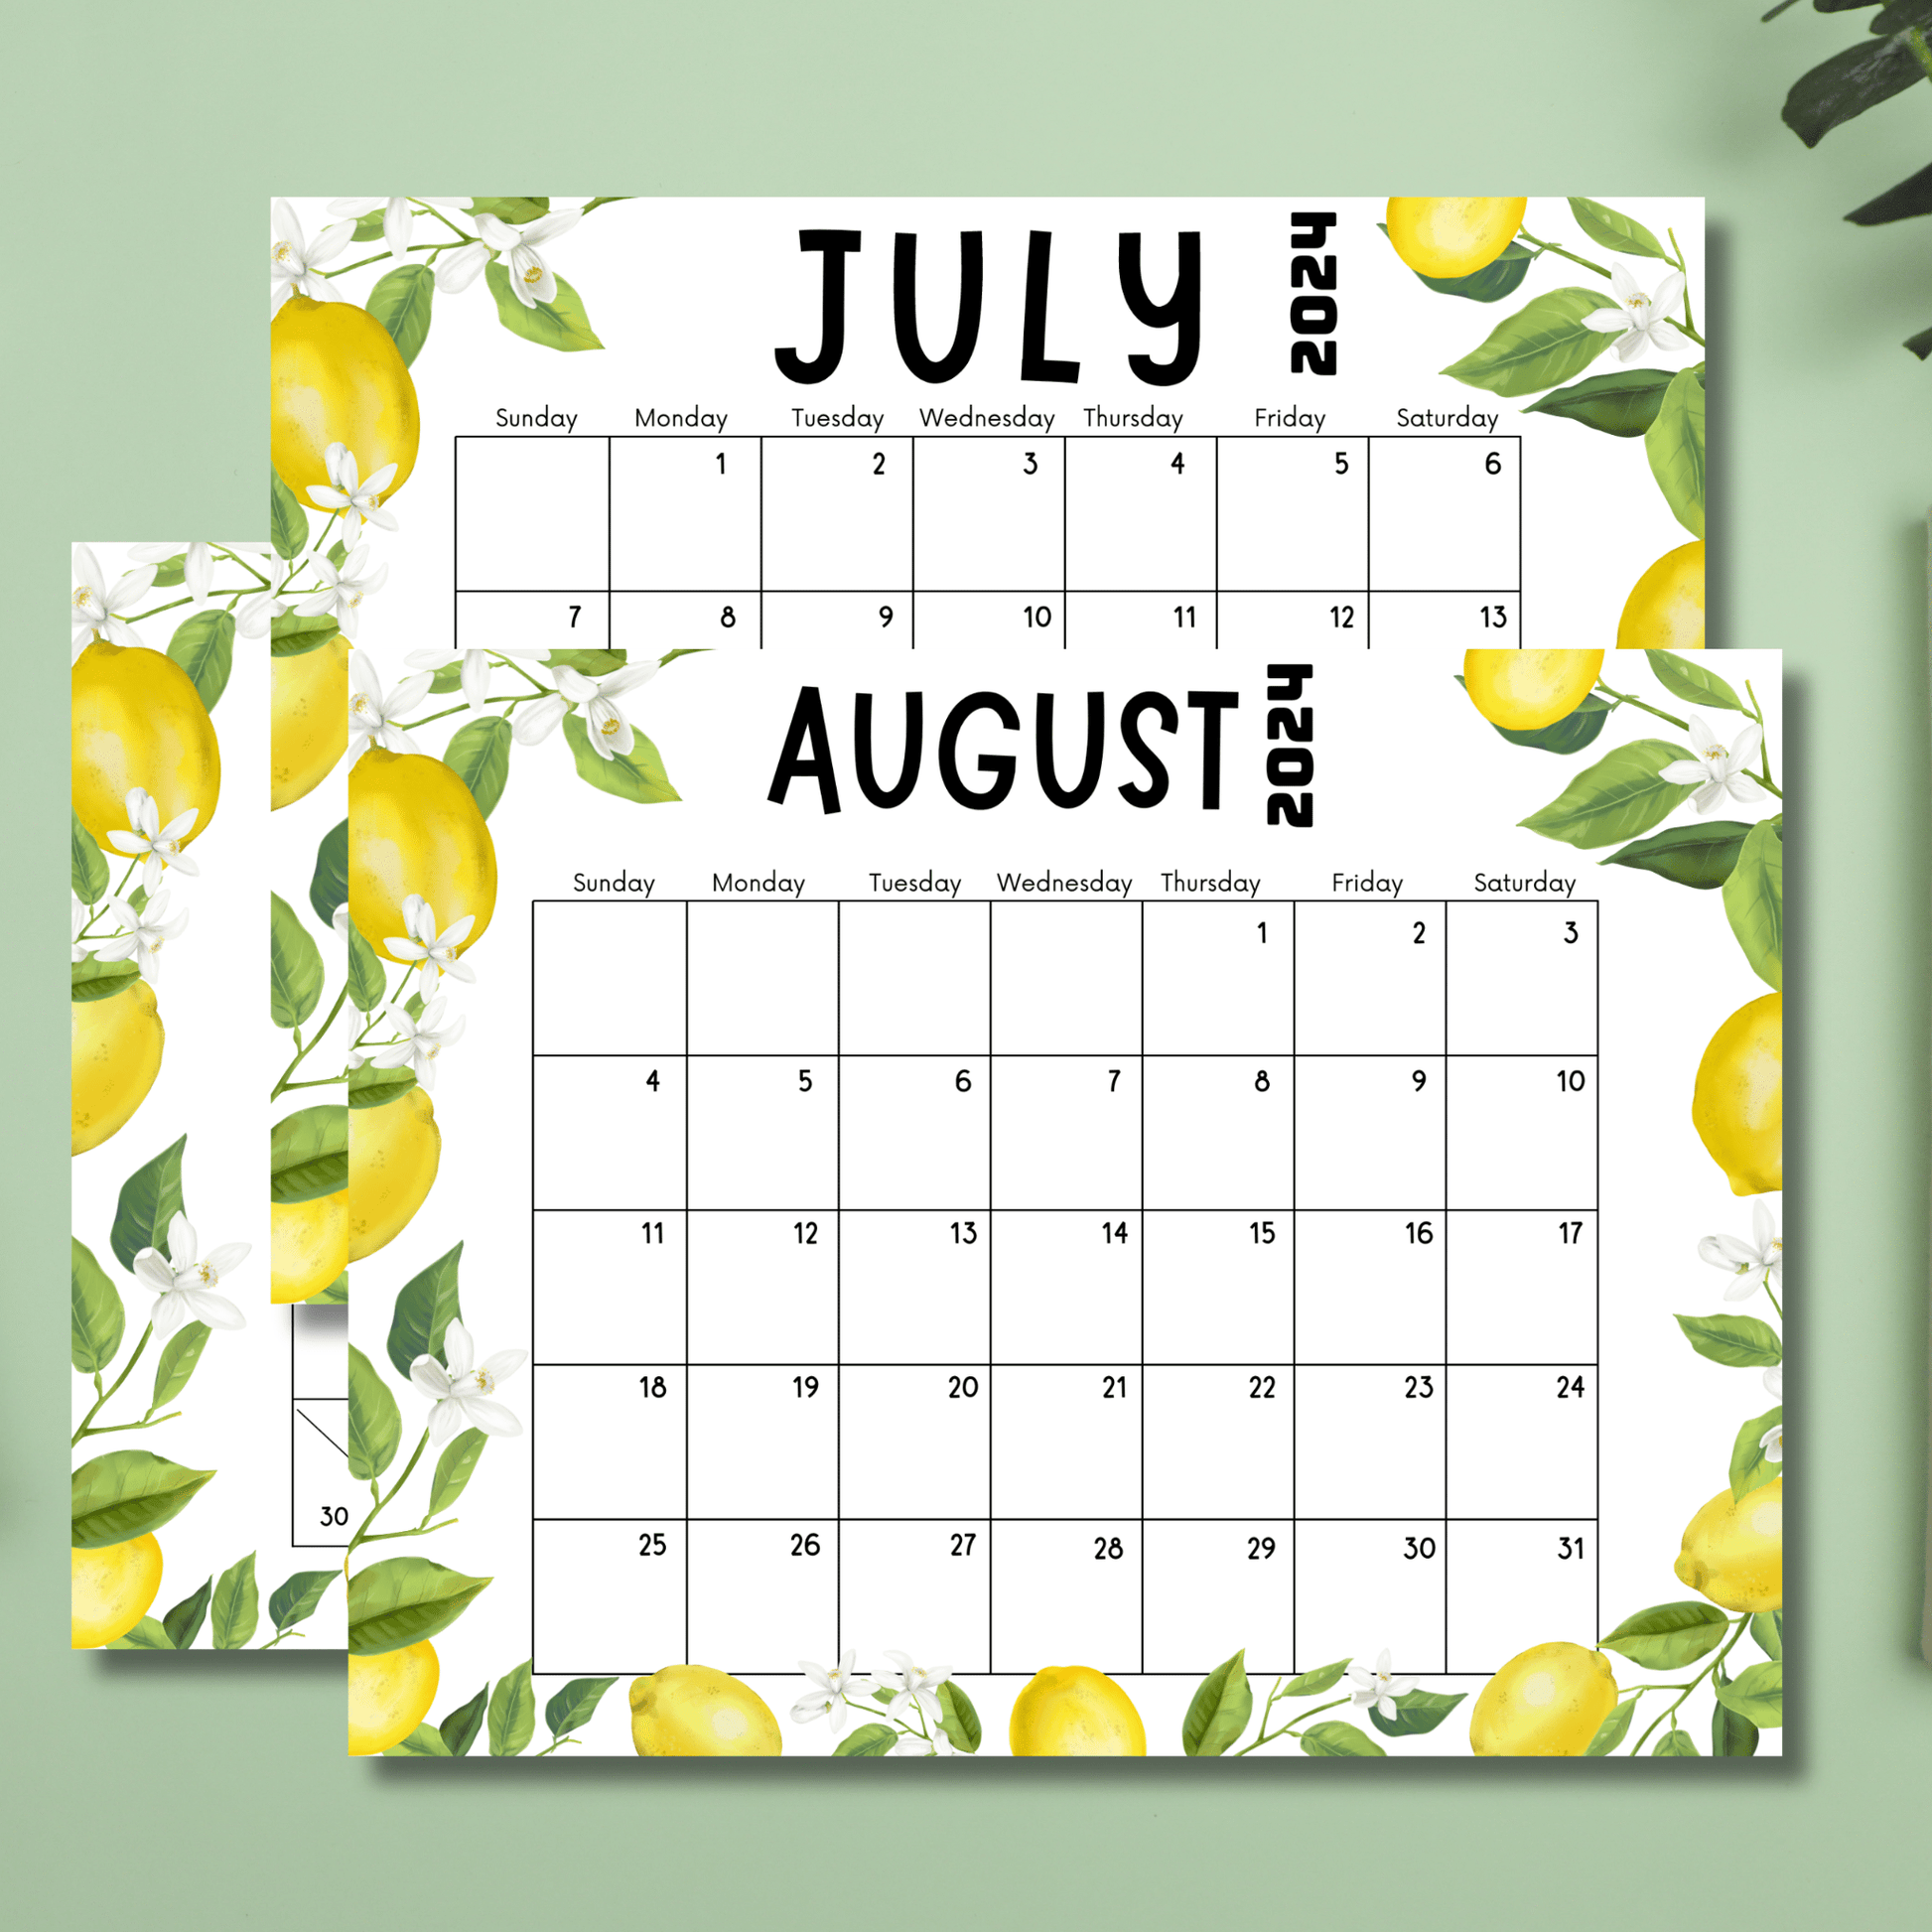 2024 printable monthly calendar templates for june, july and august on green background